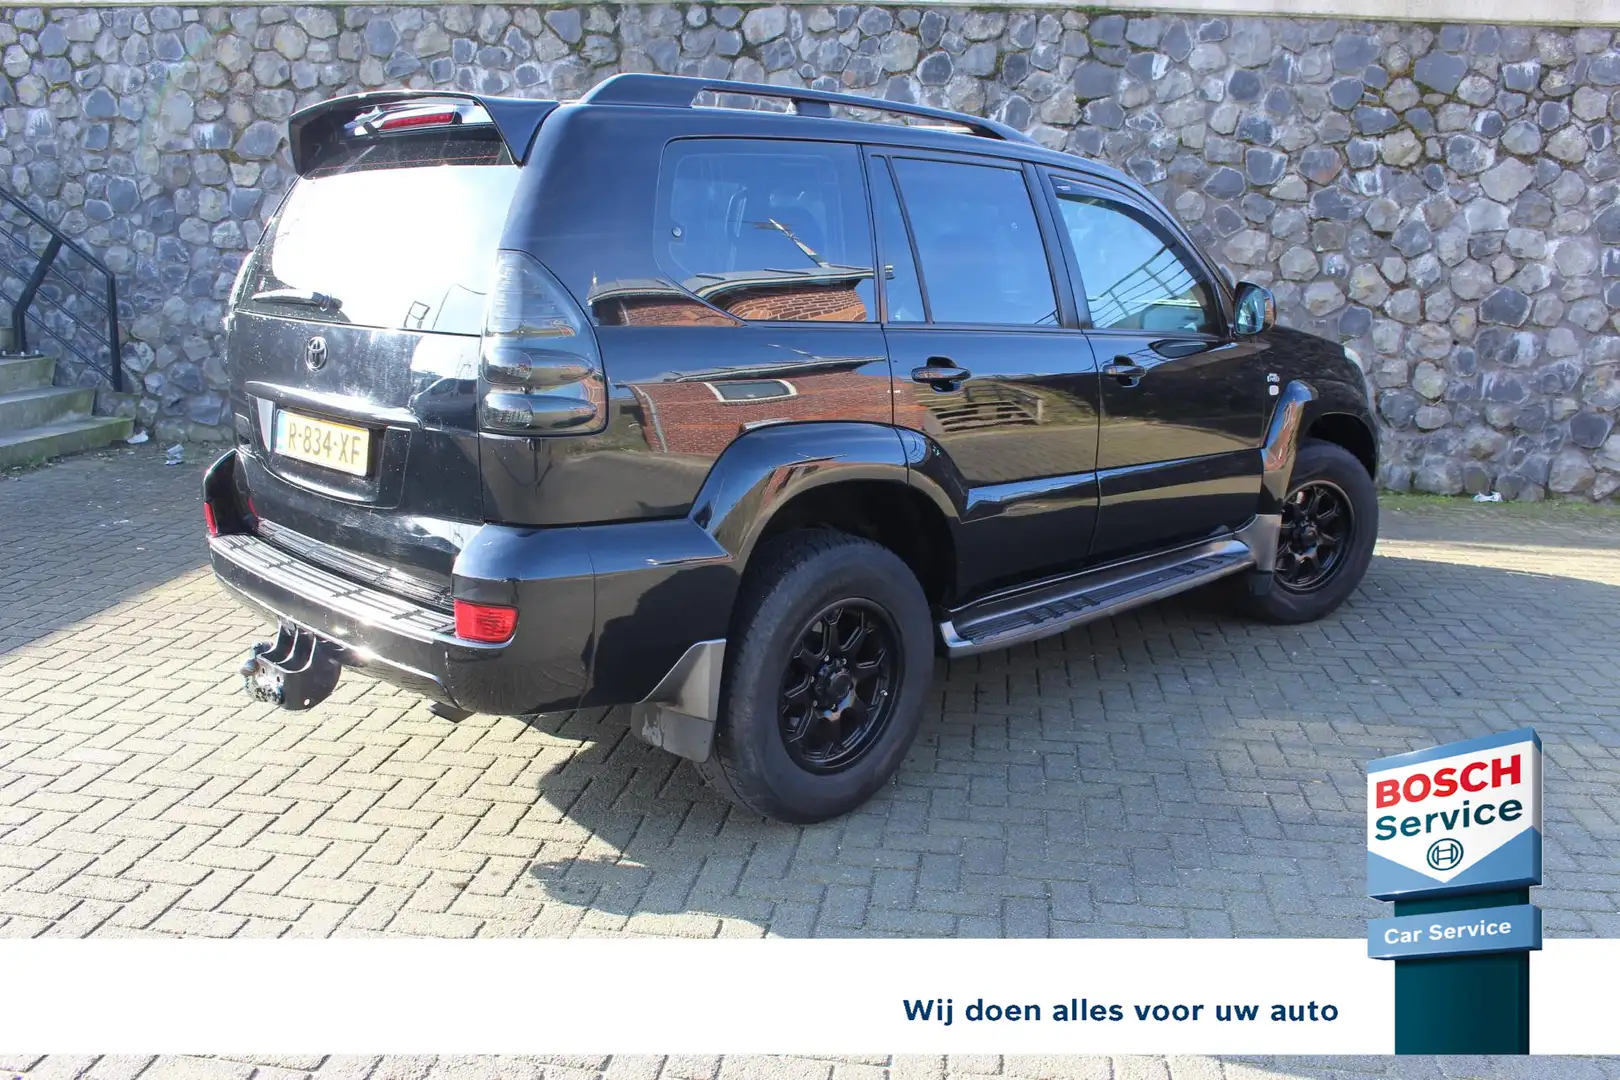 Toyota Land Cruiser 3.0 D-4D VX 5 pers Automaat Alle optie´s revisie v Siyah - 2